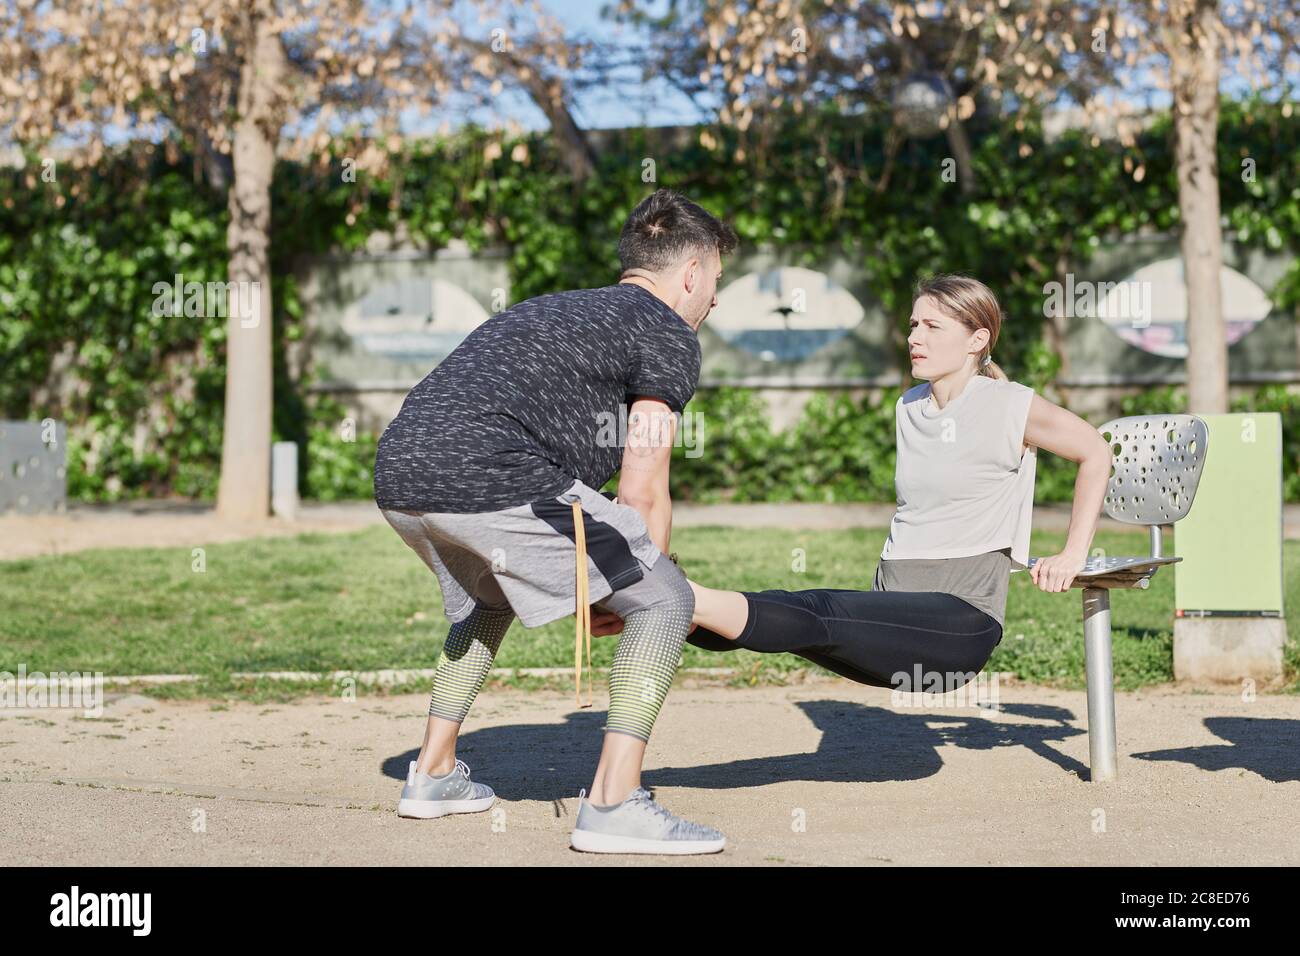 Woman during work out with coach in park Stock Photo